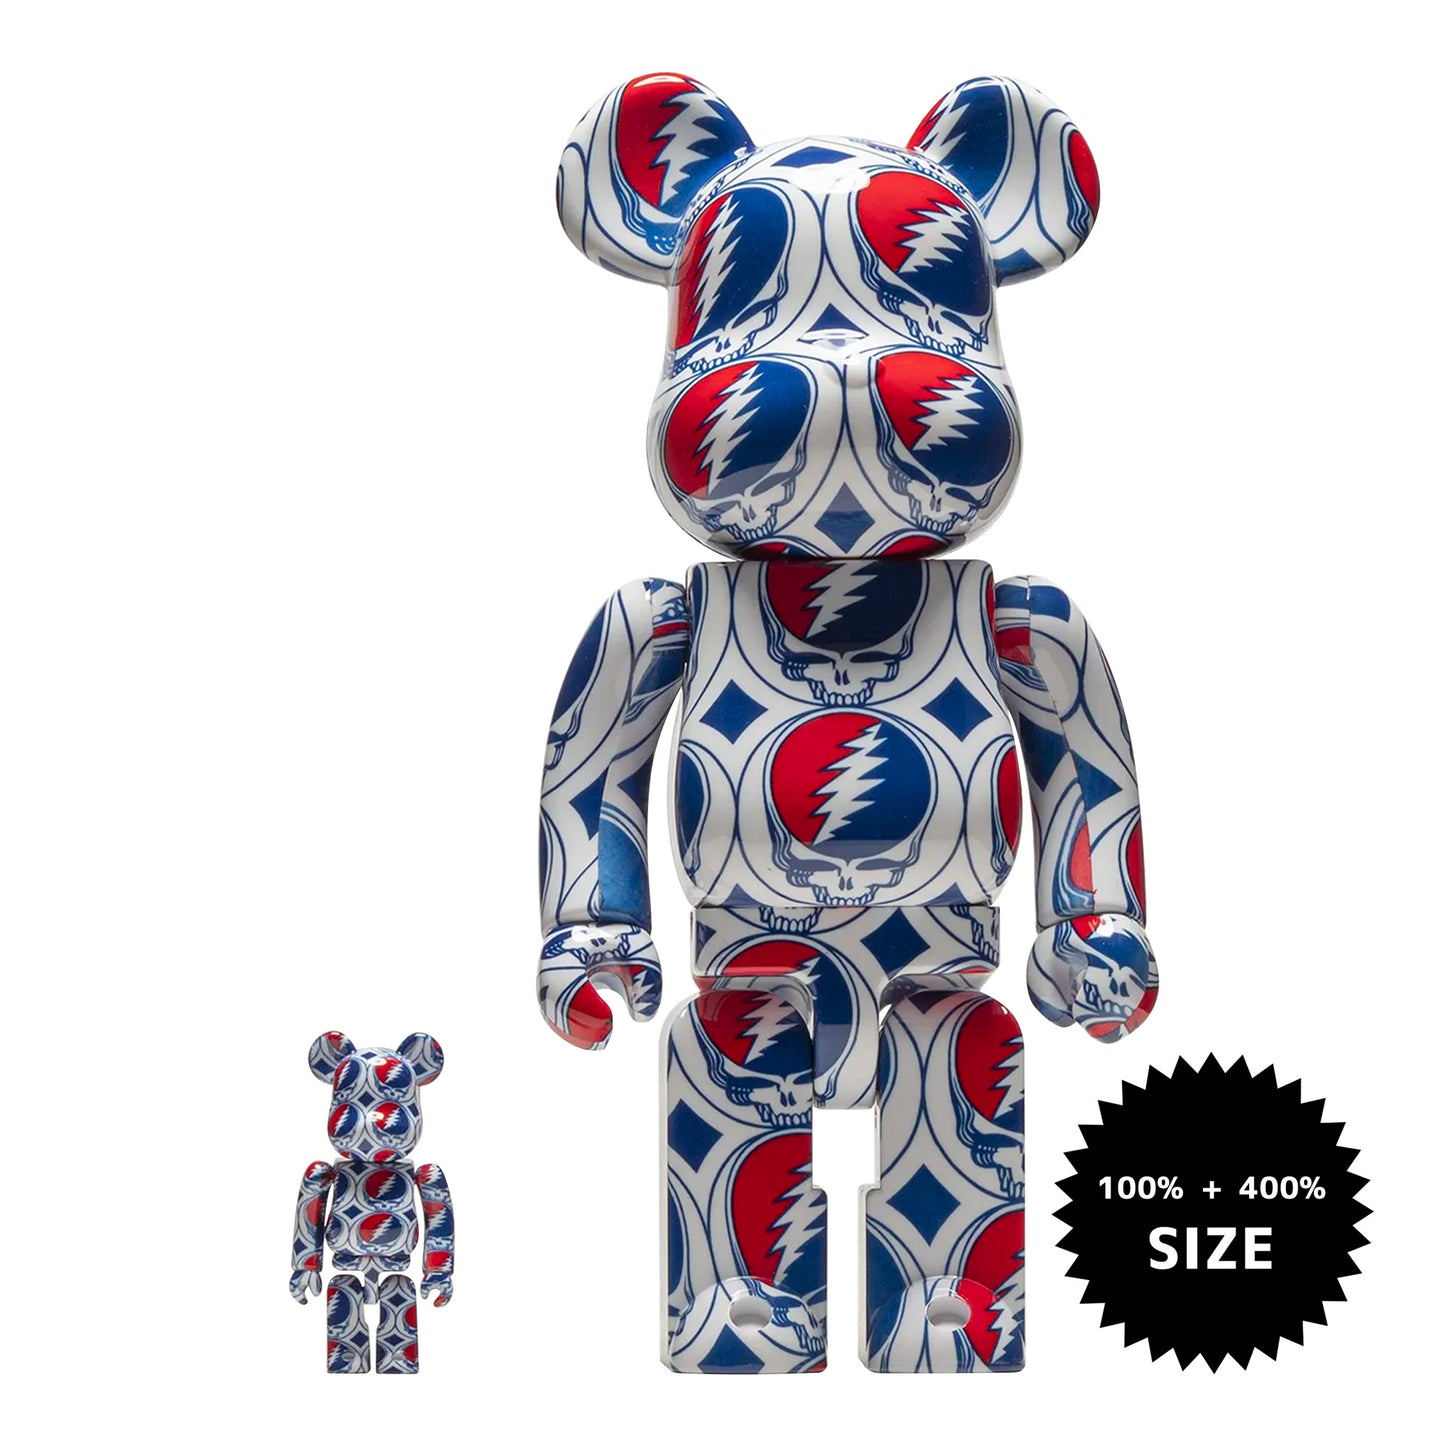 MEDICOM TOY: BE@RBRICK - Grateful Dead Steal Your Face 100% & 400%